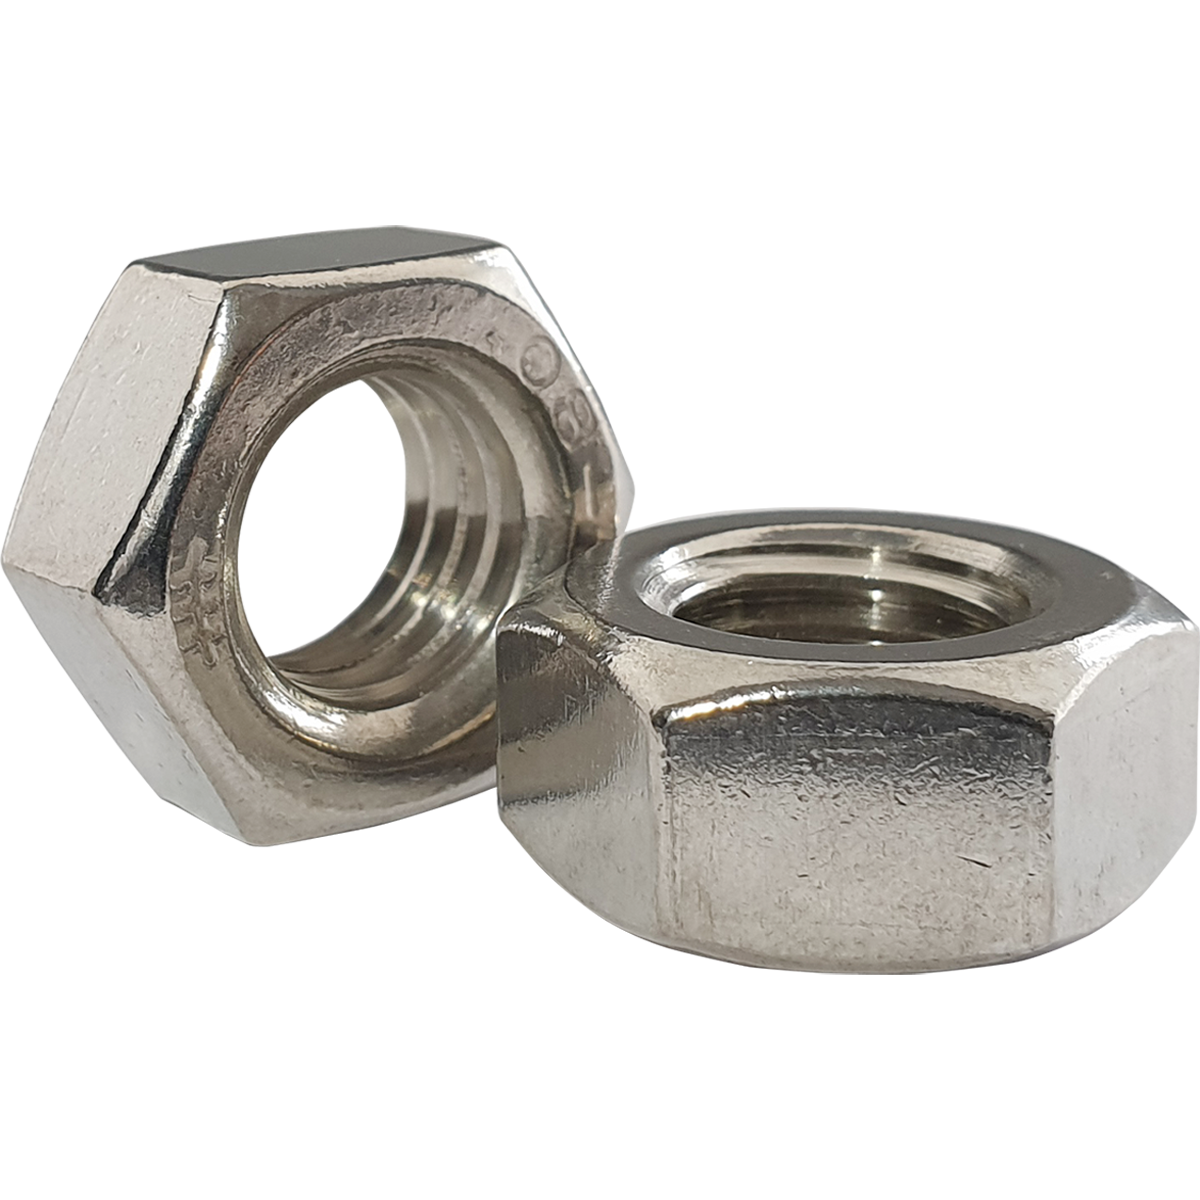 A2 stainless steel hex full nuts, also known as hex nuts or hexagon nuts, available at great prices.